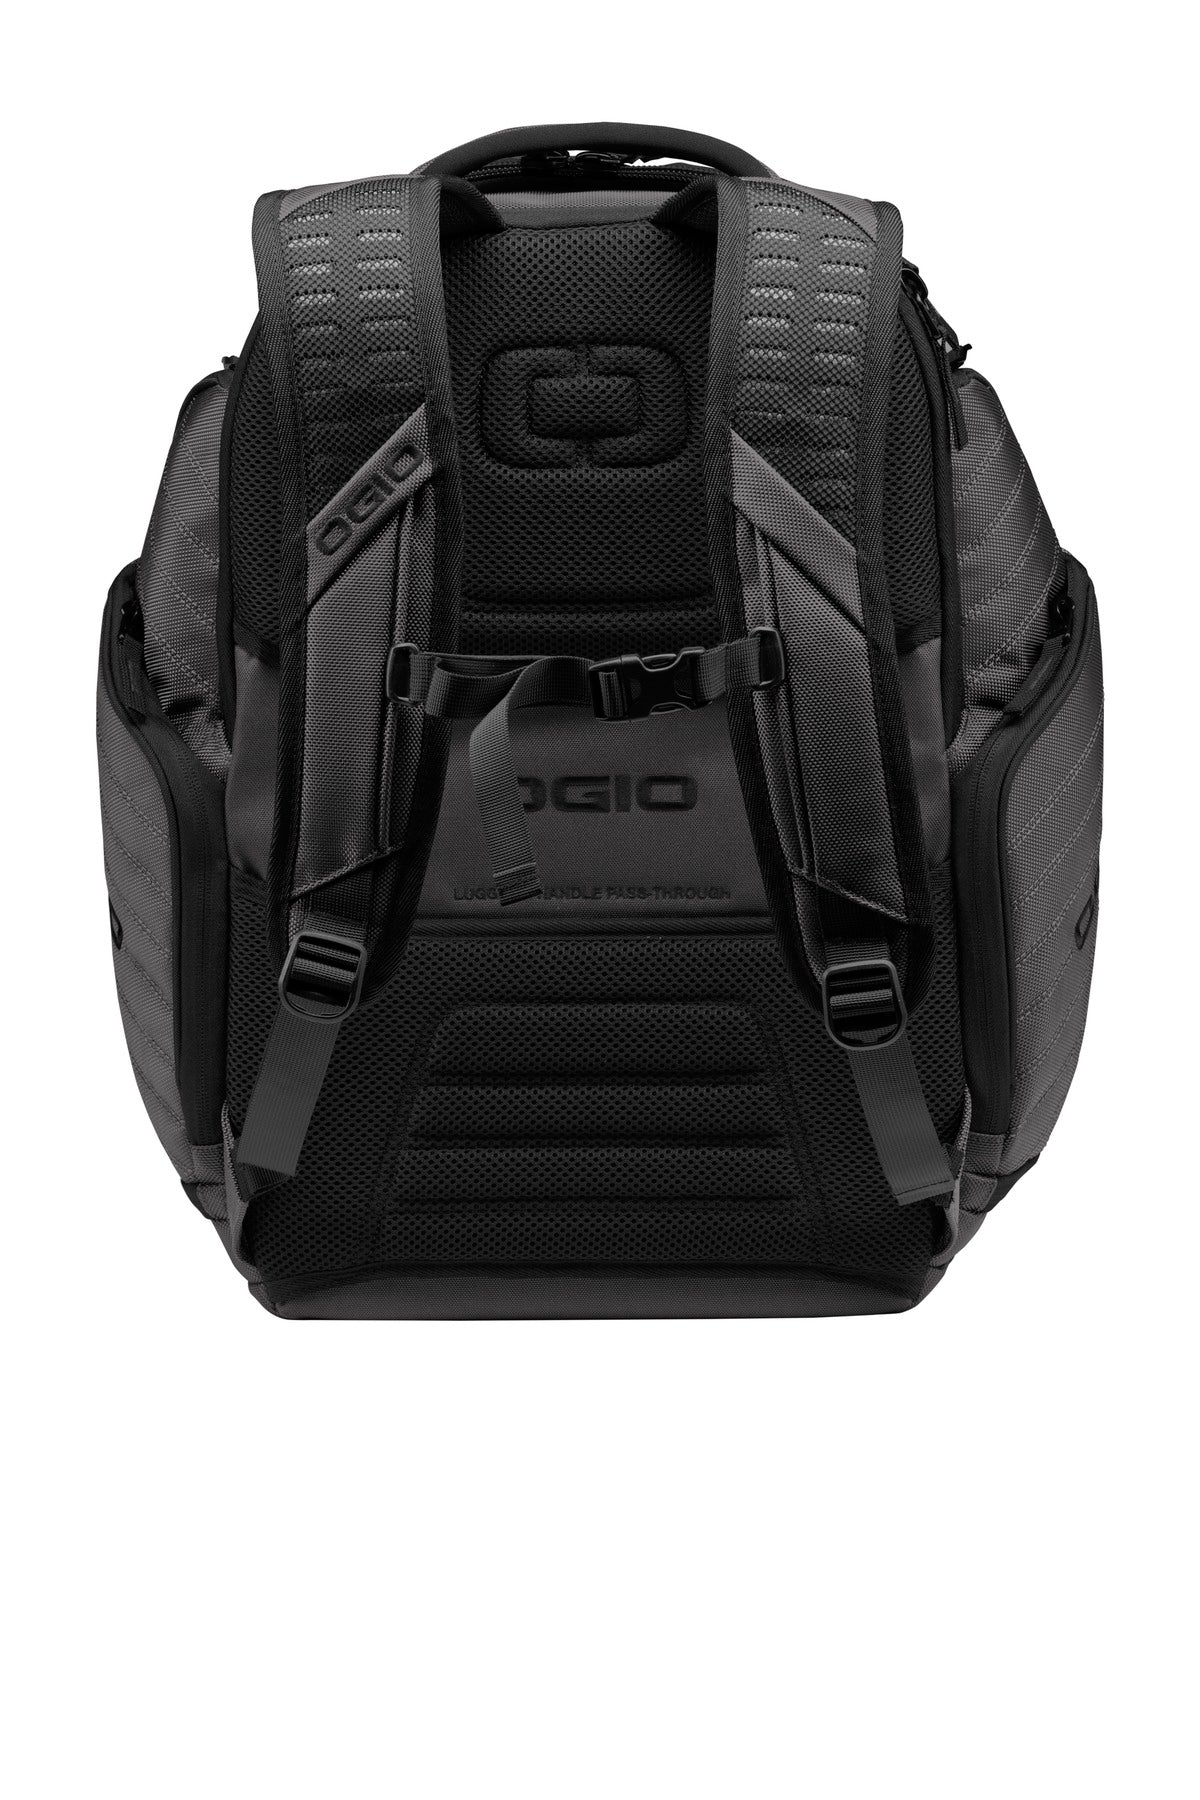 OGIO Flashpoint Pack. 91002